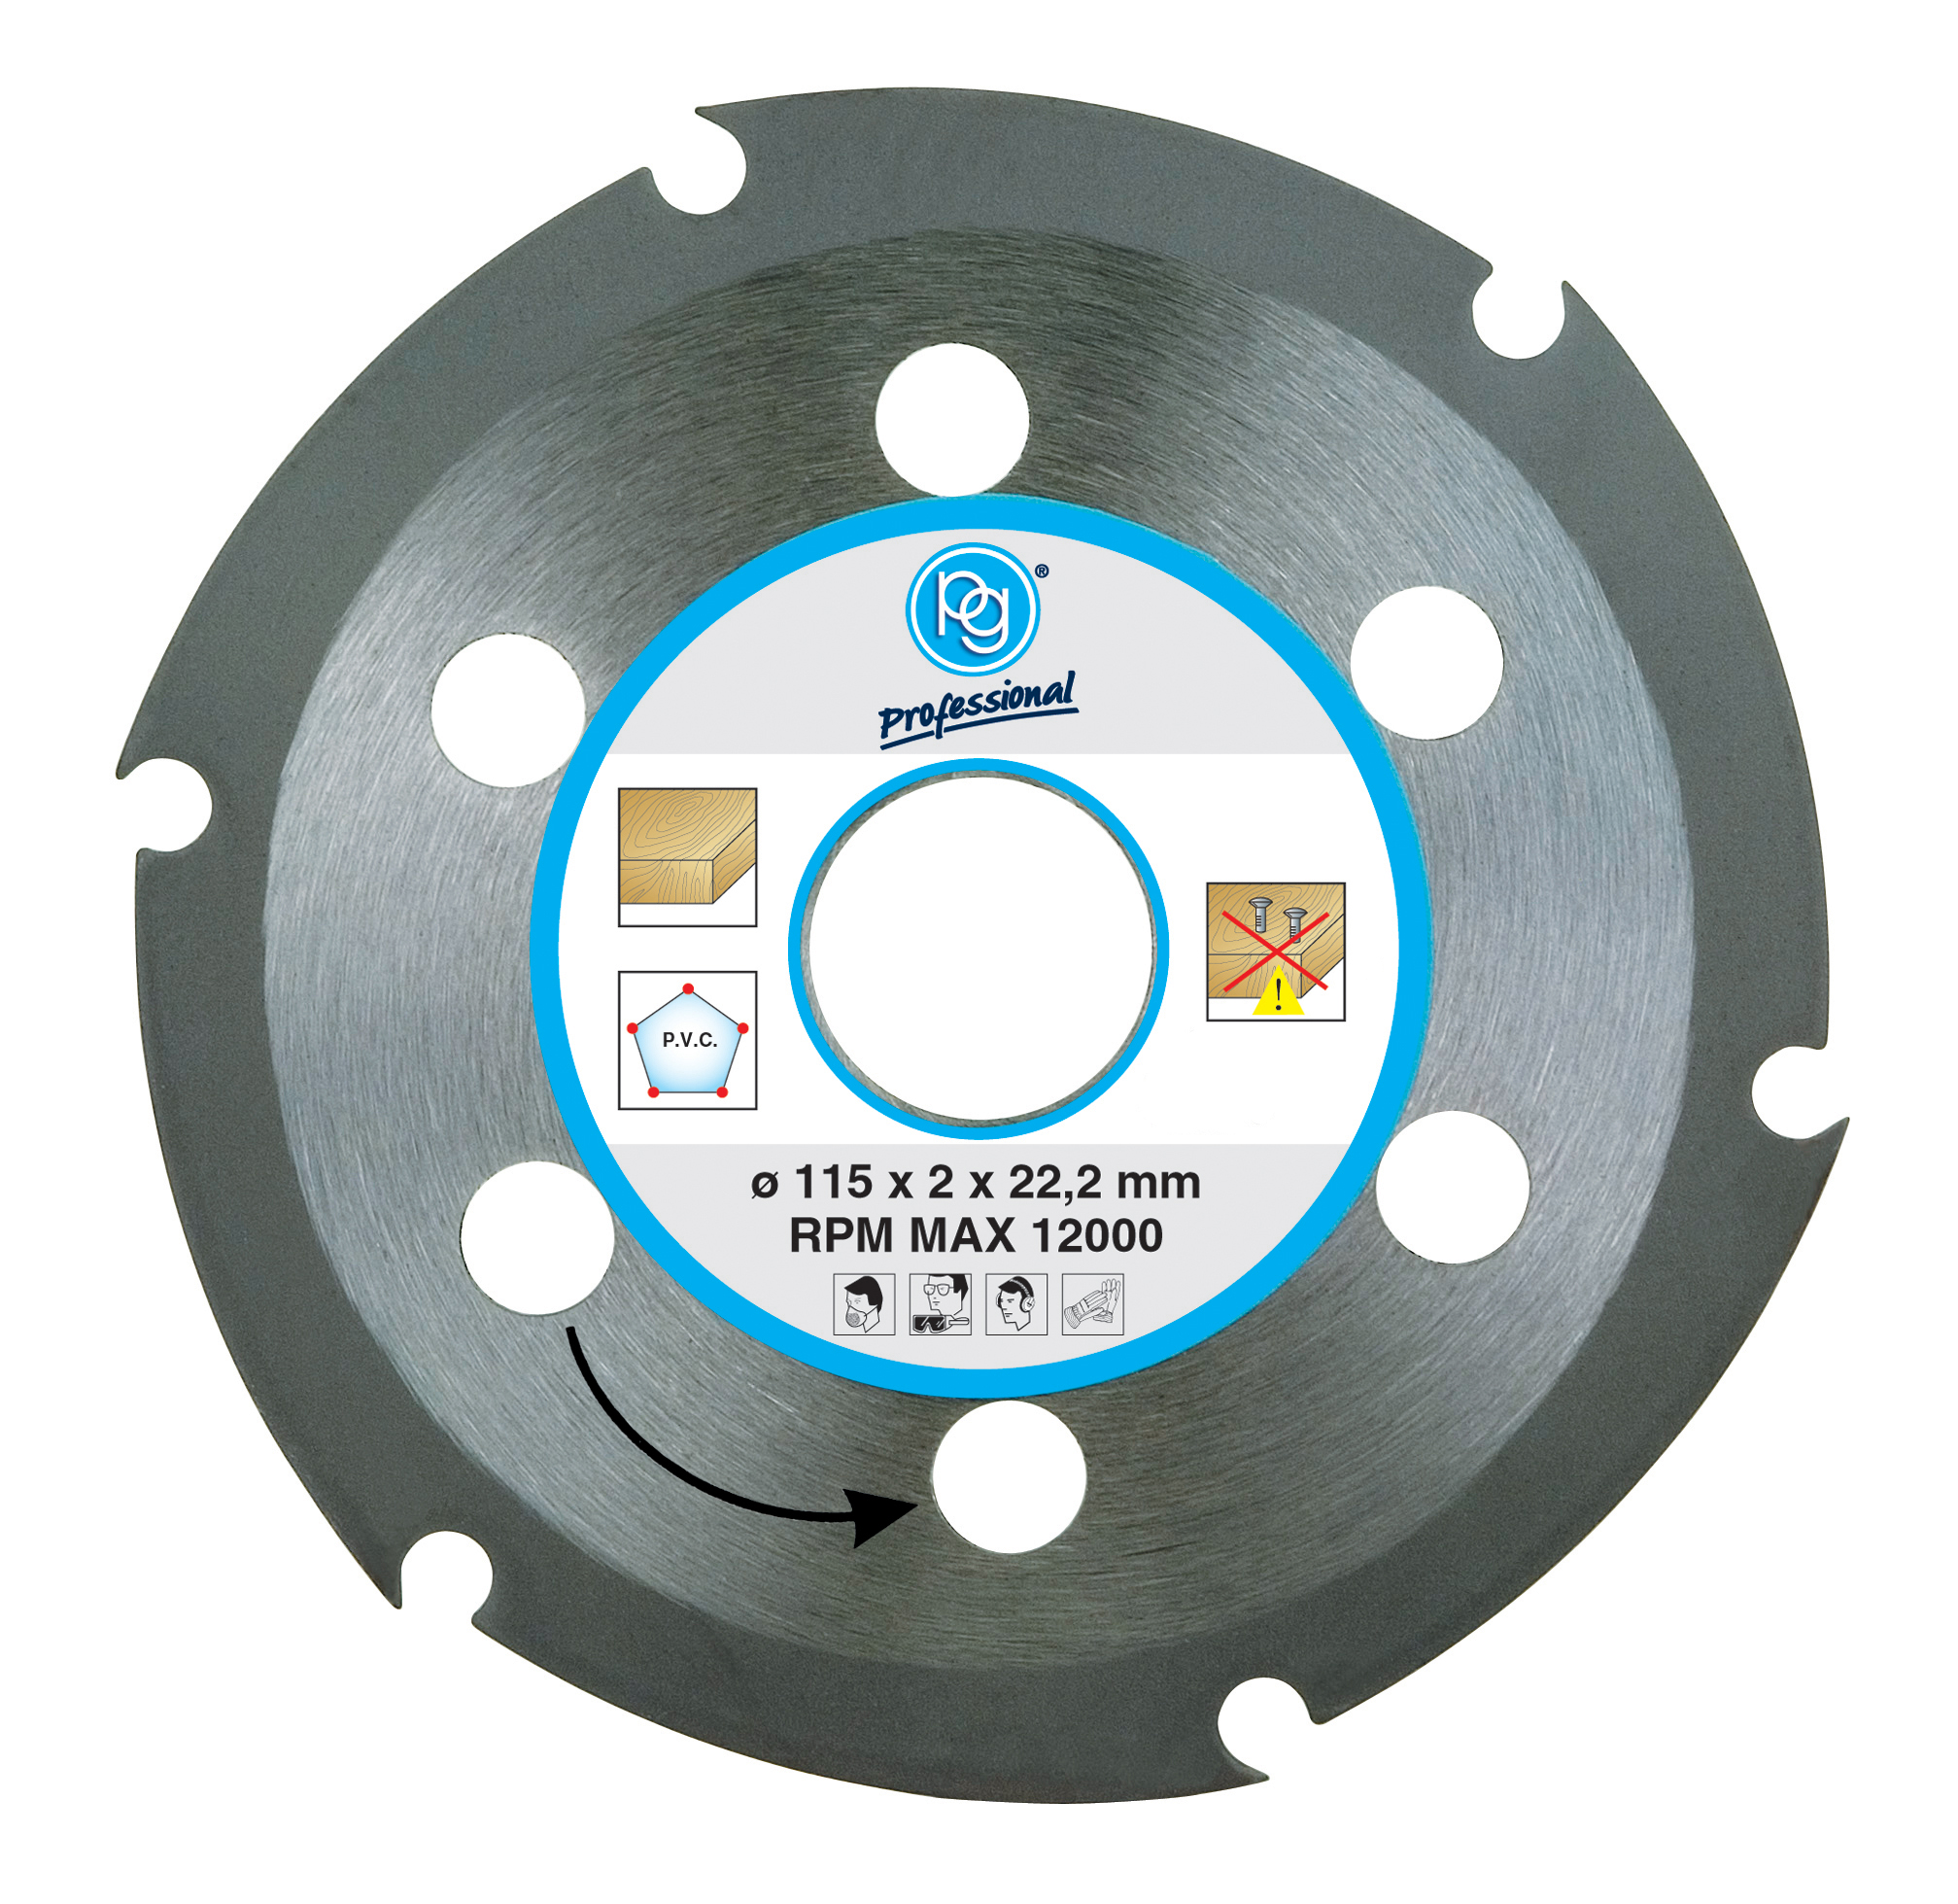 PG CUT DISC FOR WOOD 115MM